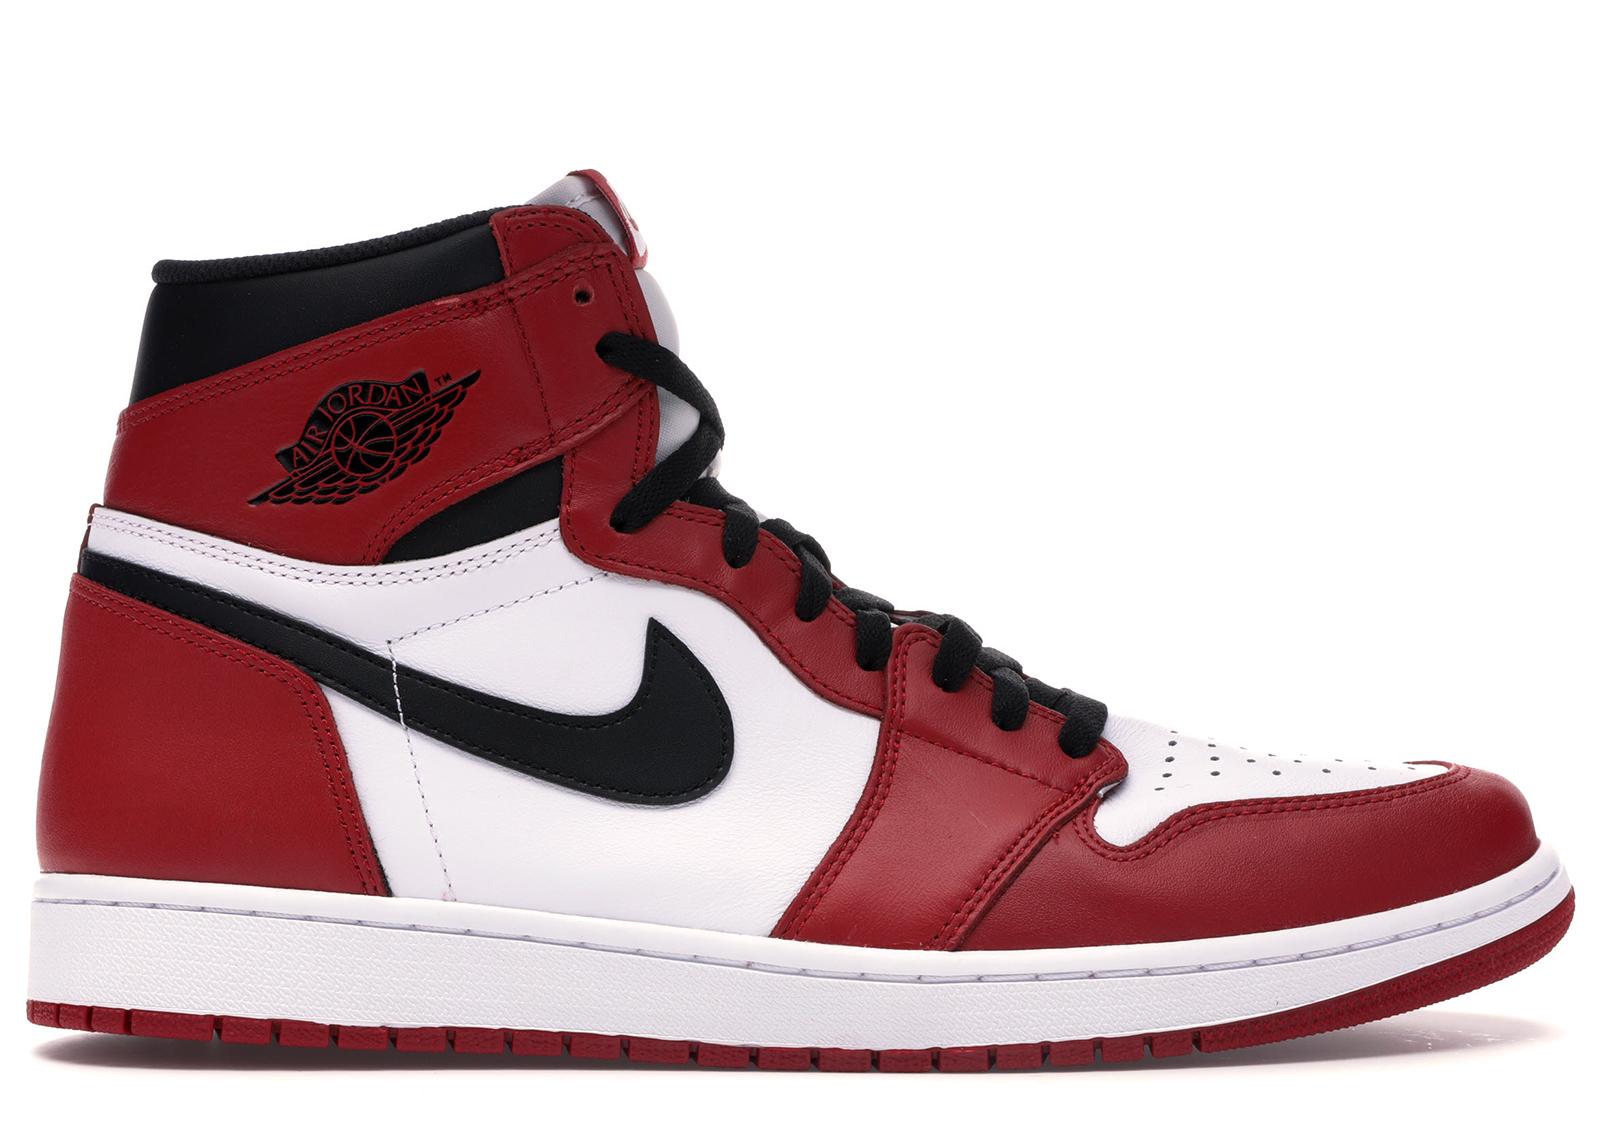 Nike 1 Retro Chicago (2013) in Red for Men - Save 64% - Lyst